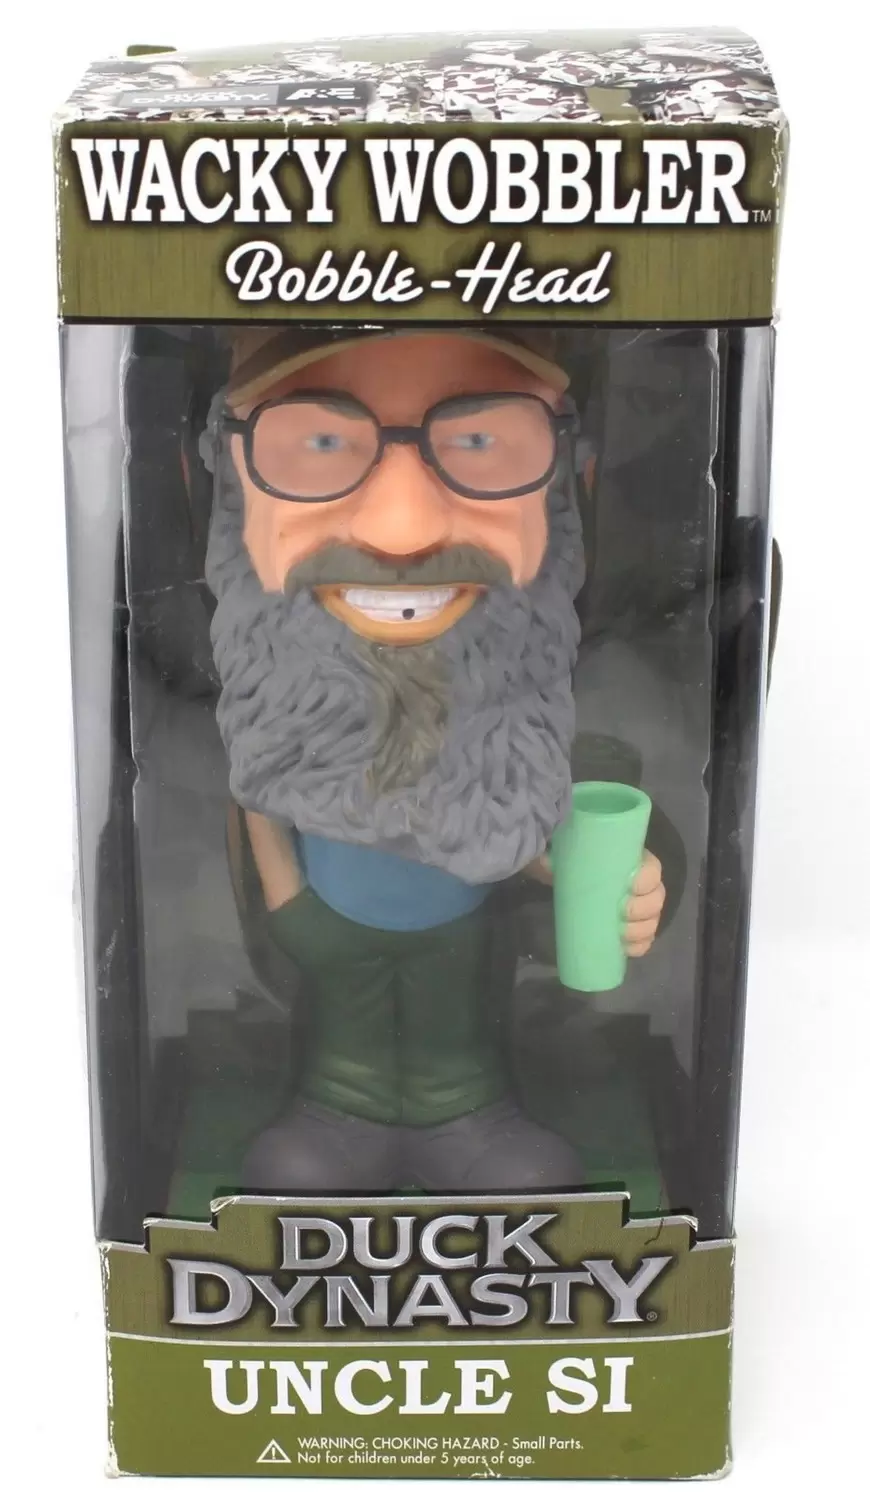 Wacky Wobbler TV Shows - Duck Dynasty - Uncle Si